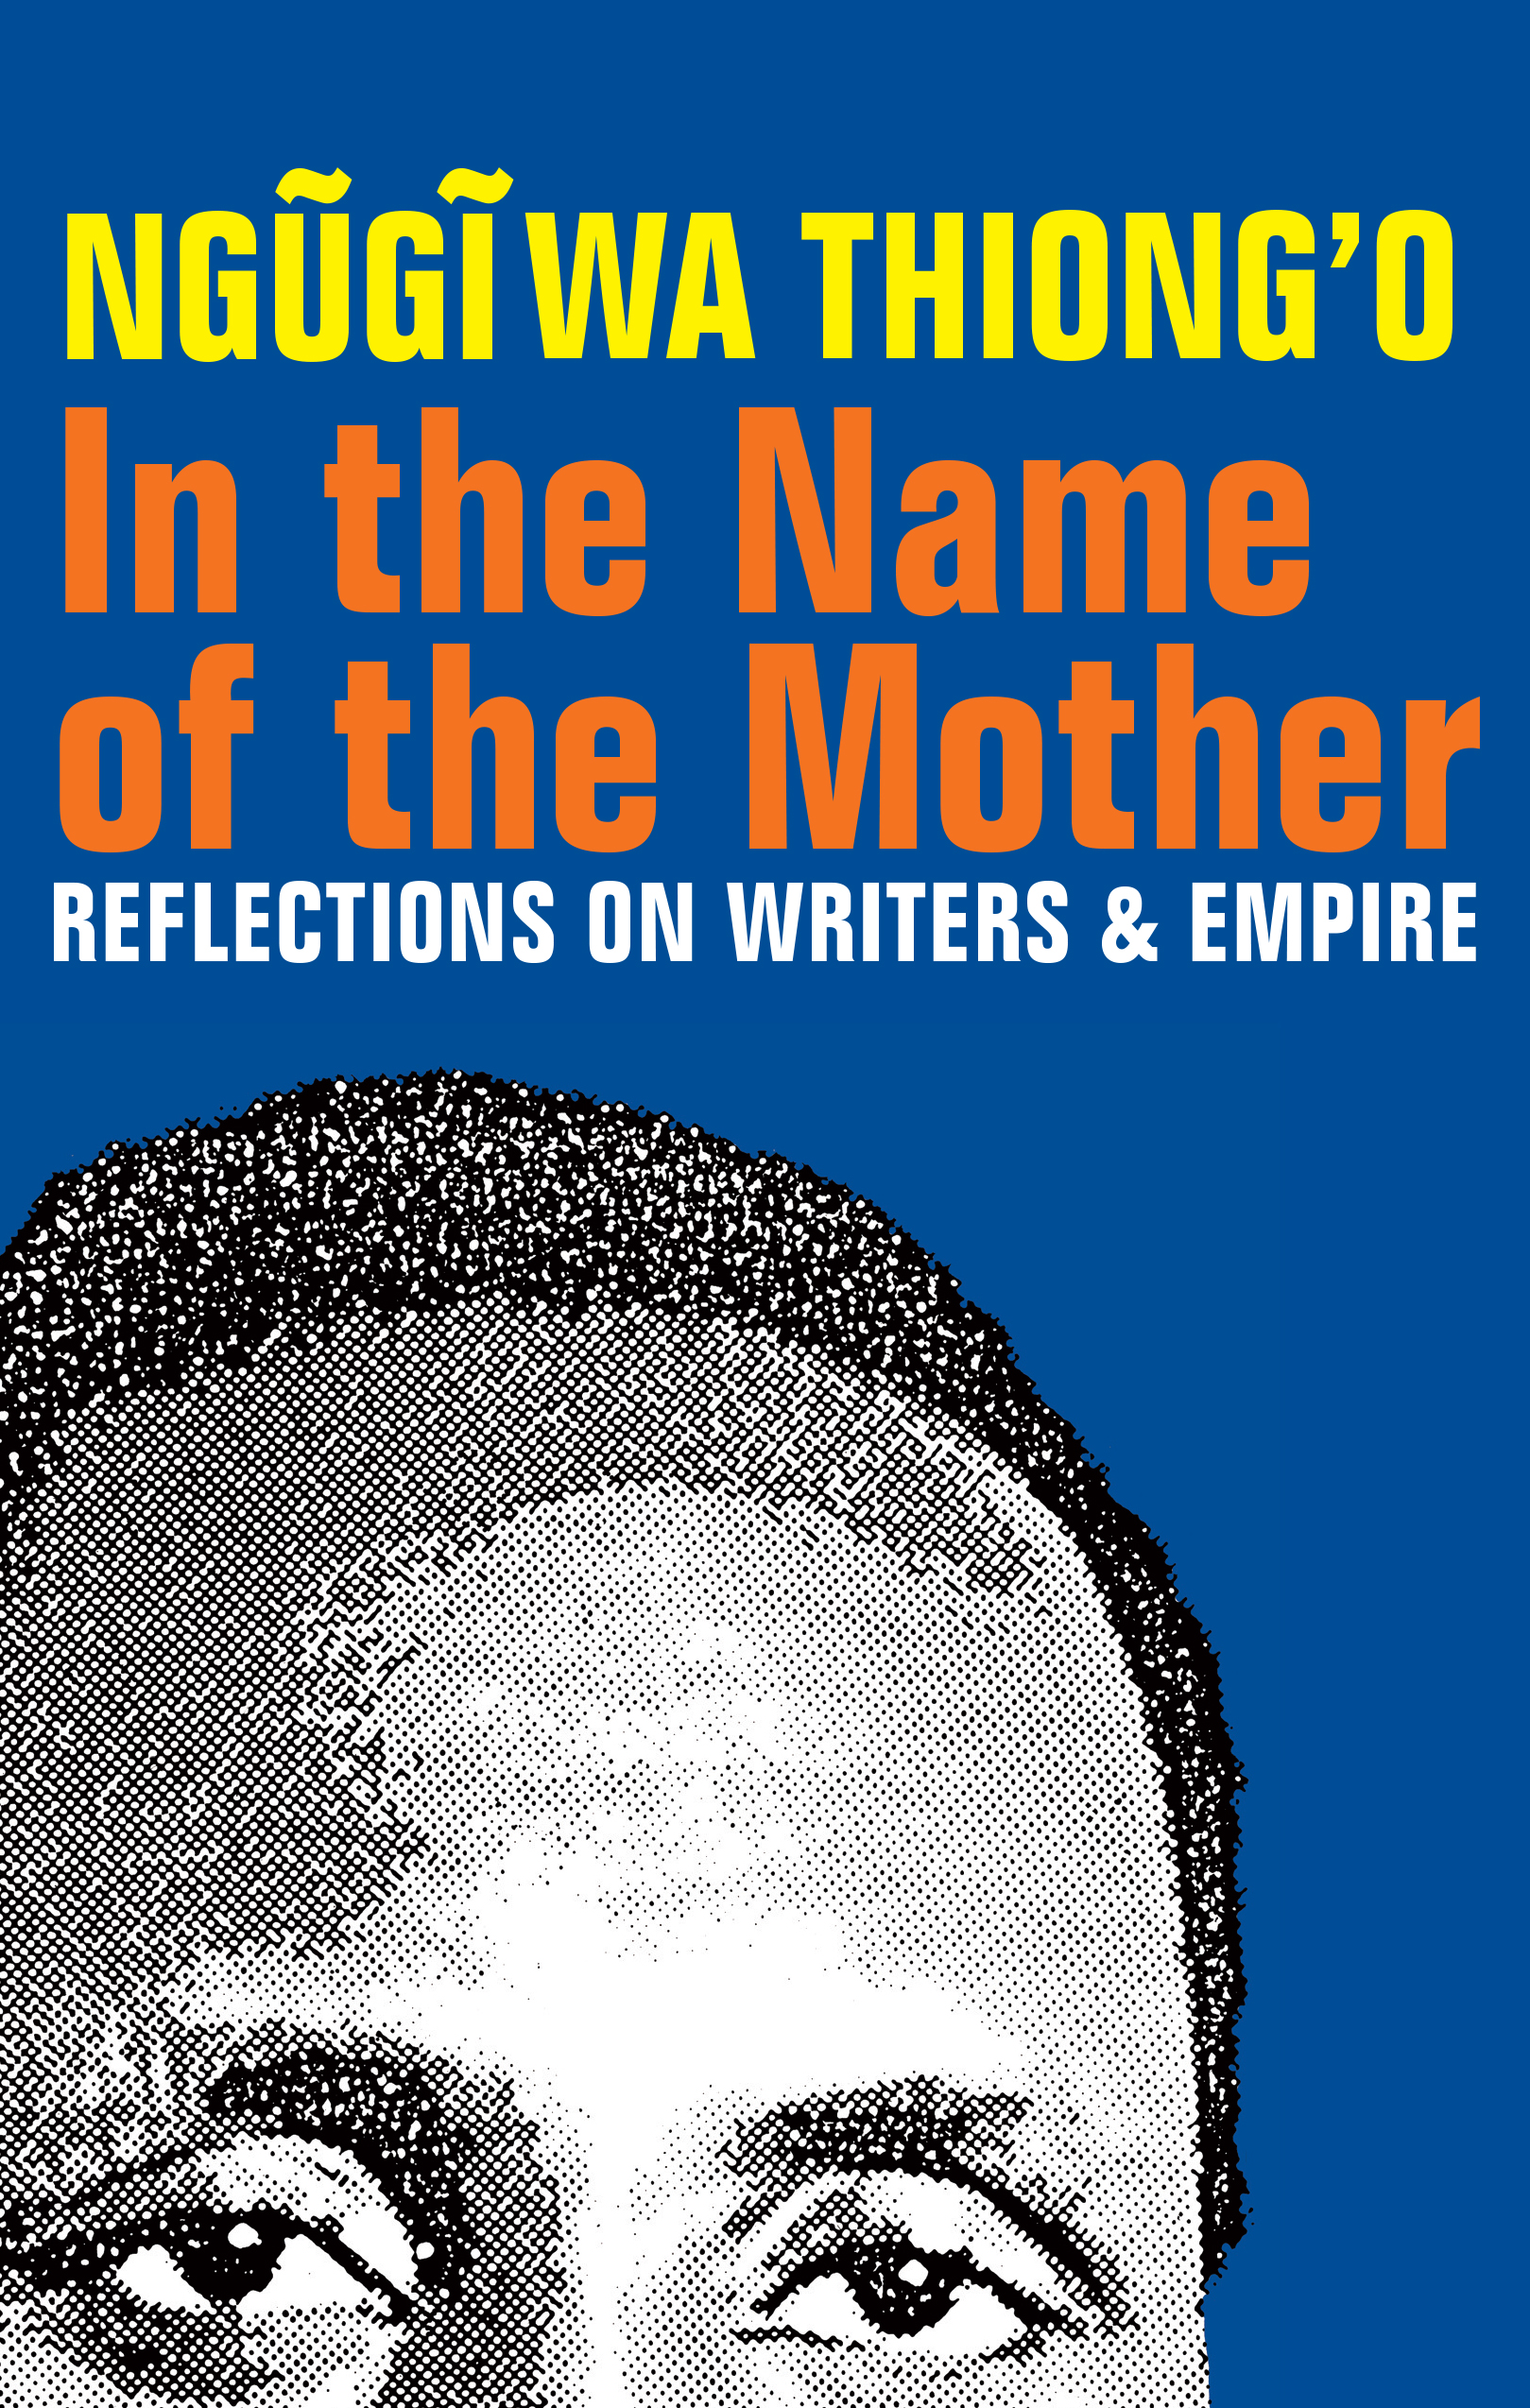 In the Name of the Mother - 15-24.99